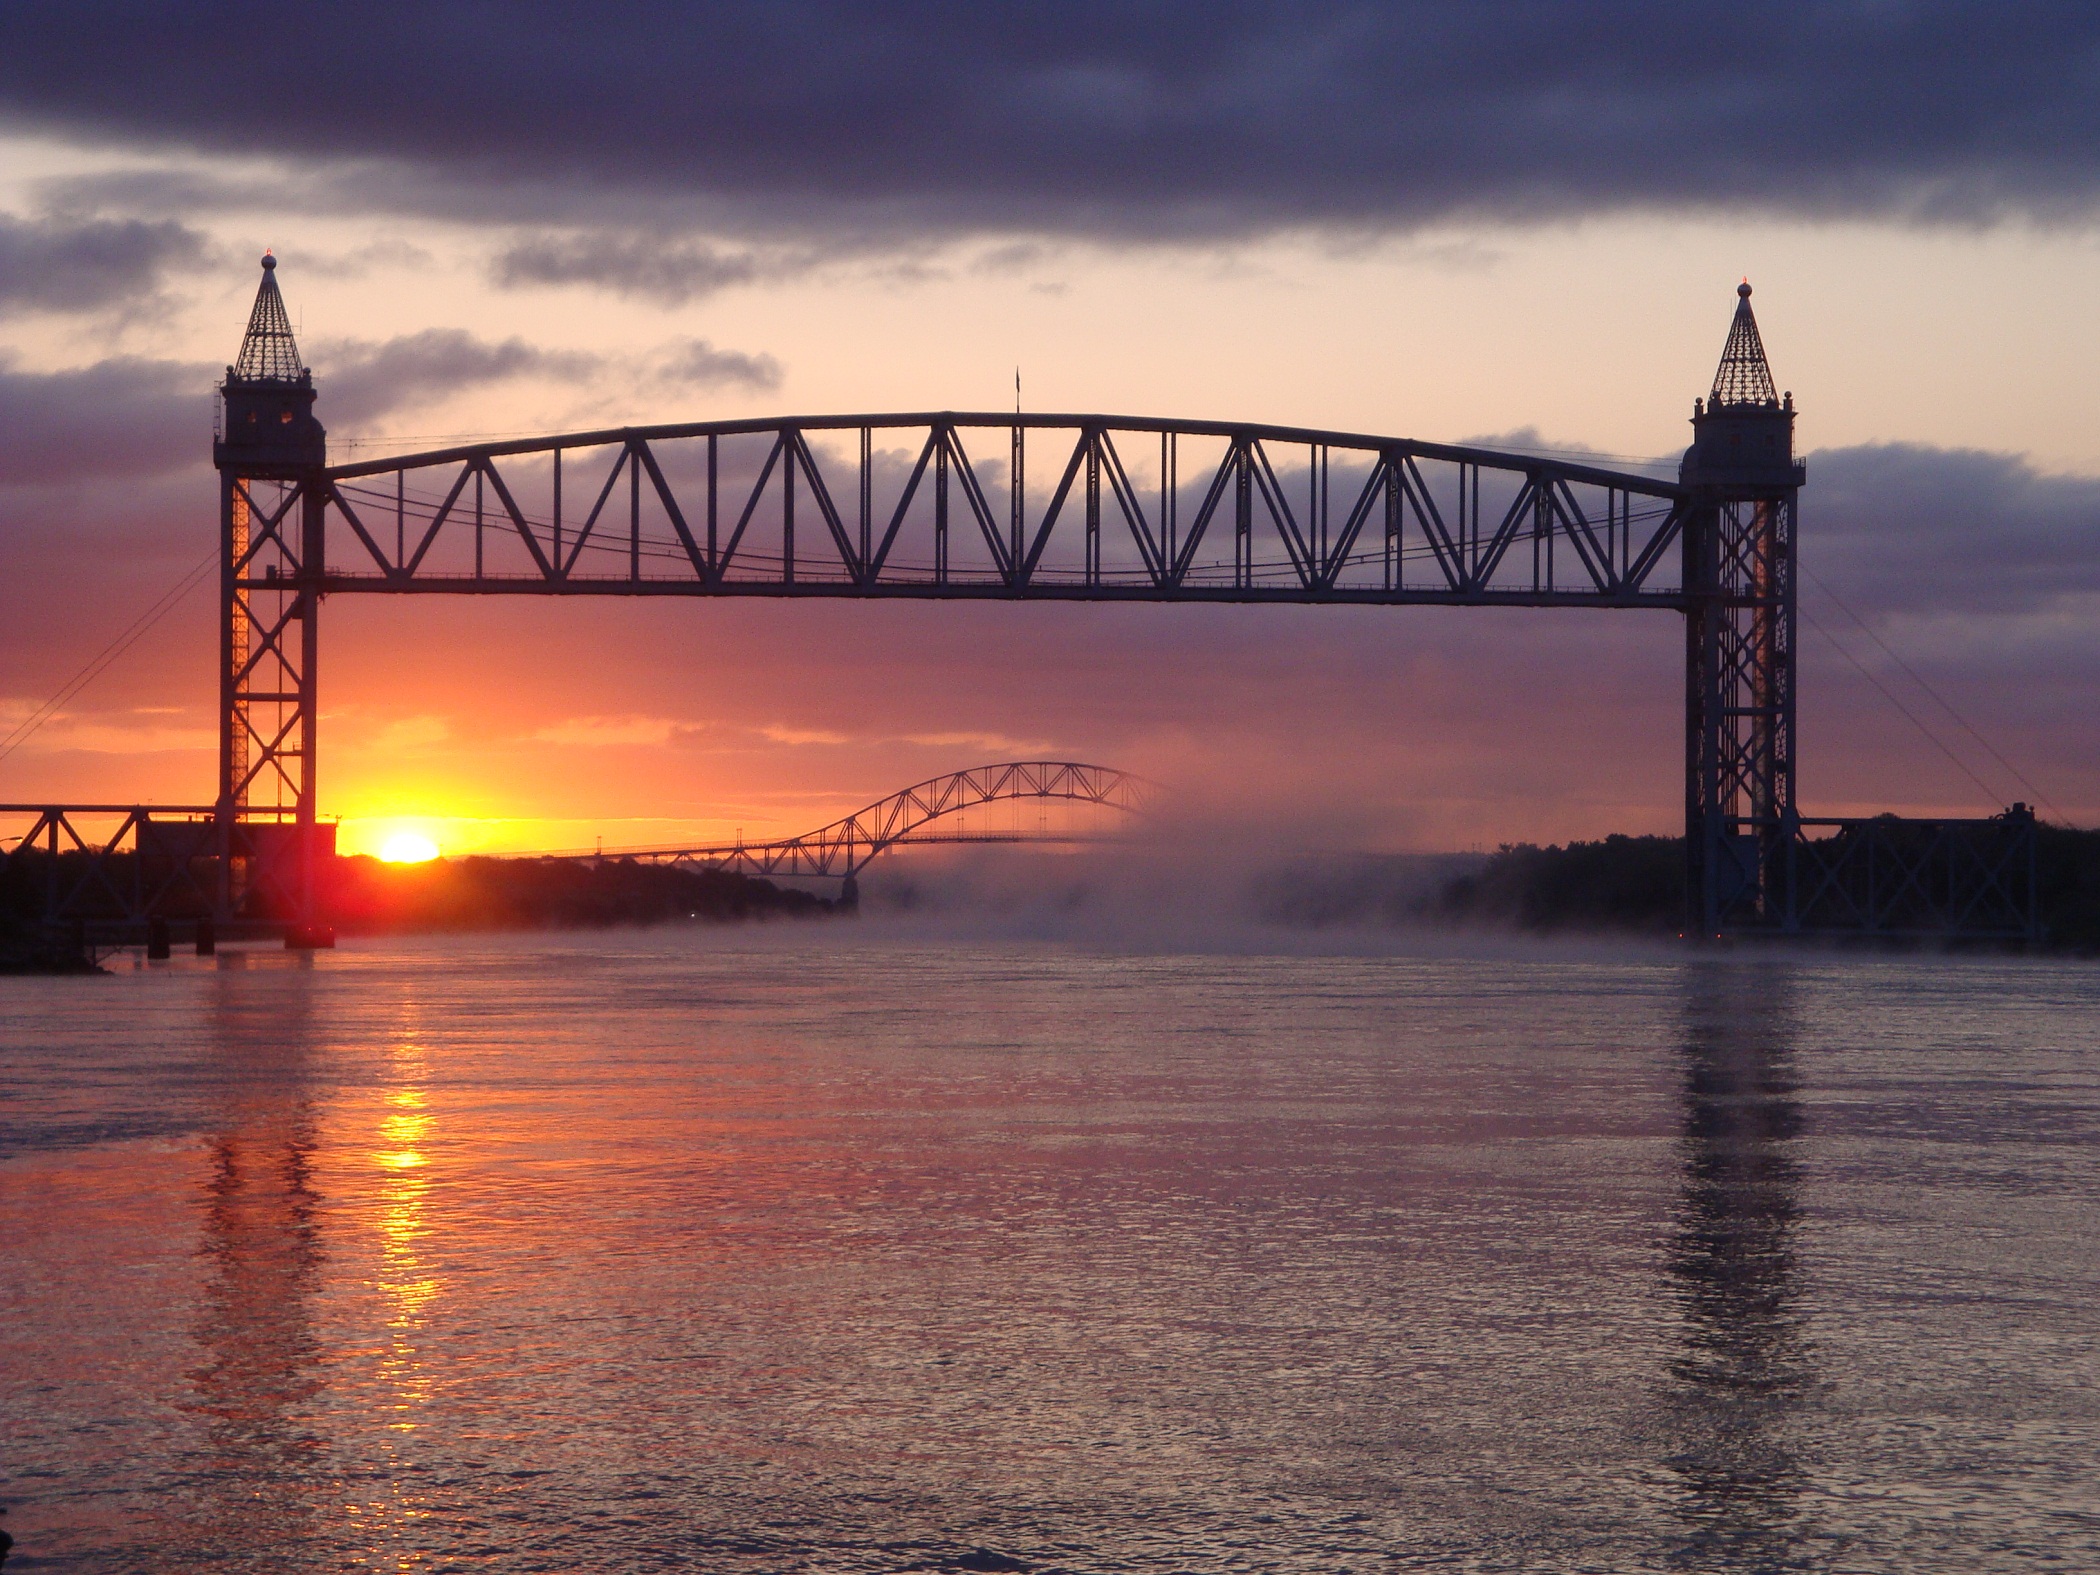 Sunrise, Cape Cod Canal (user submitted)